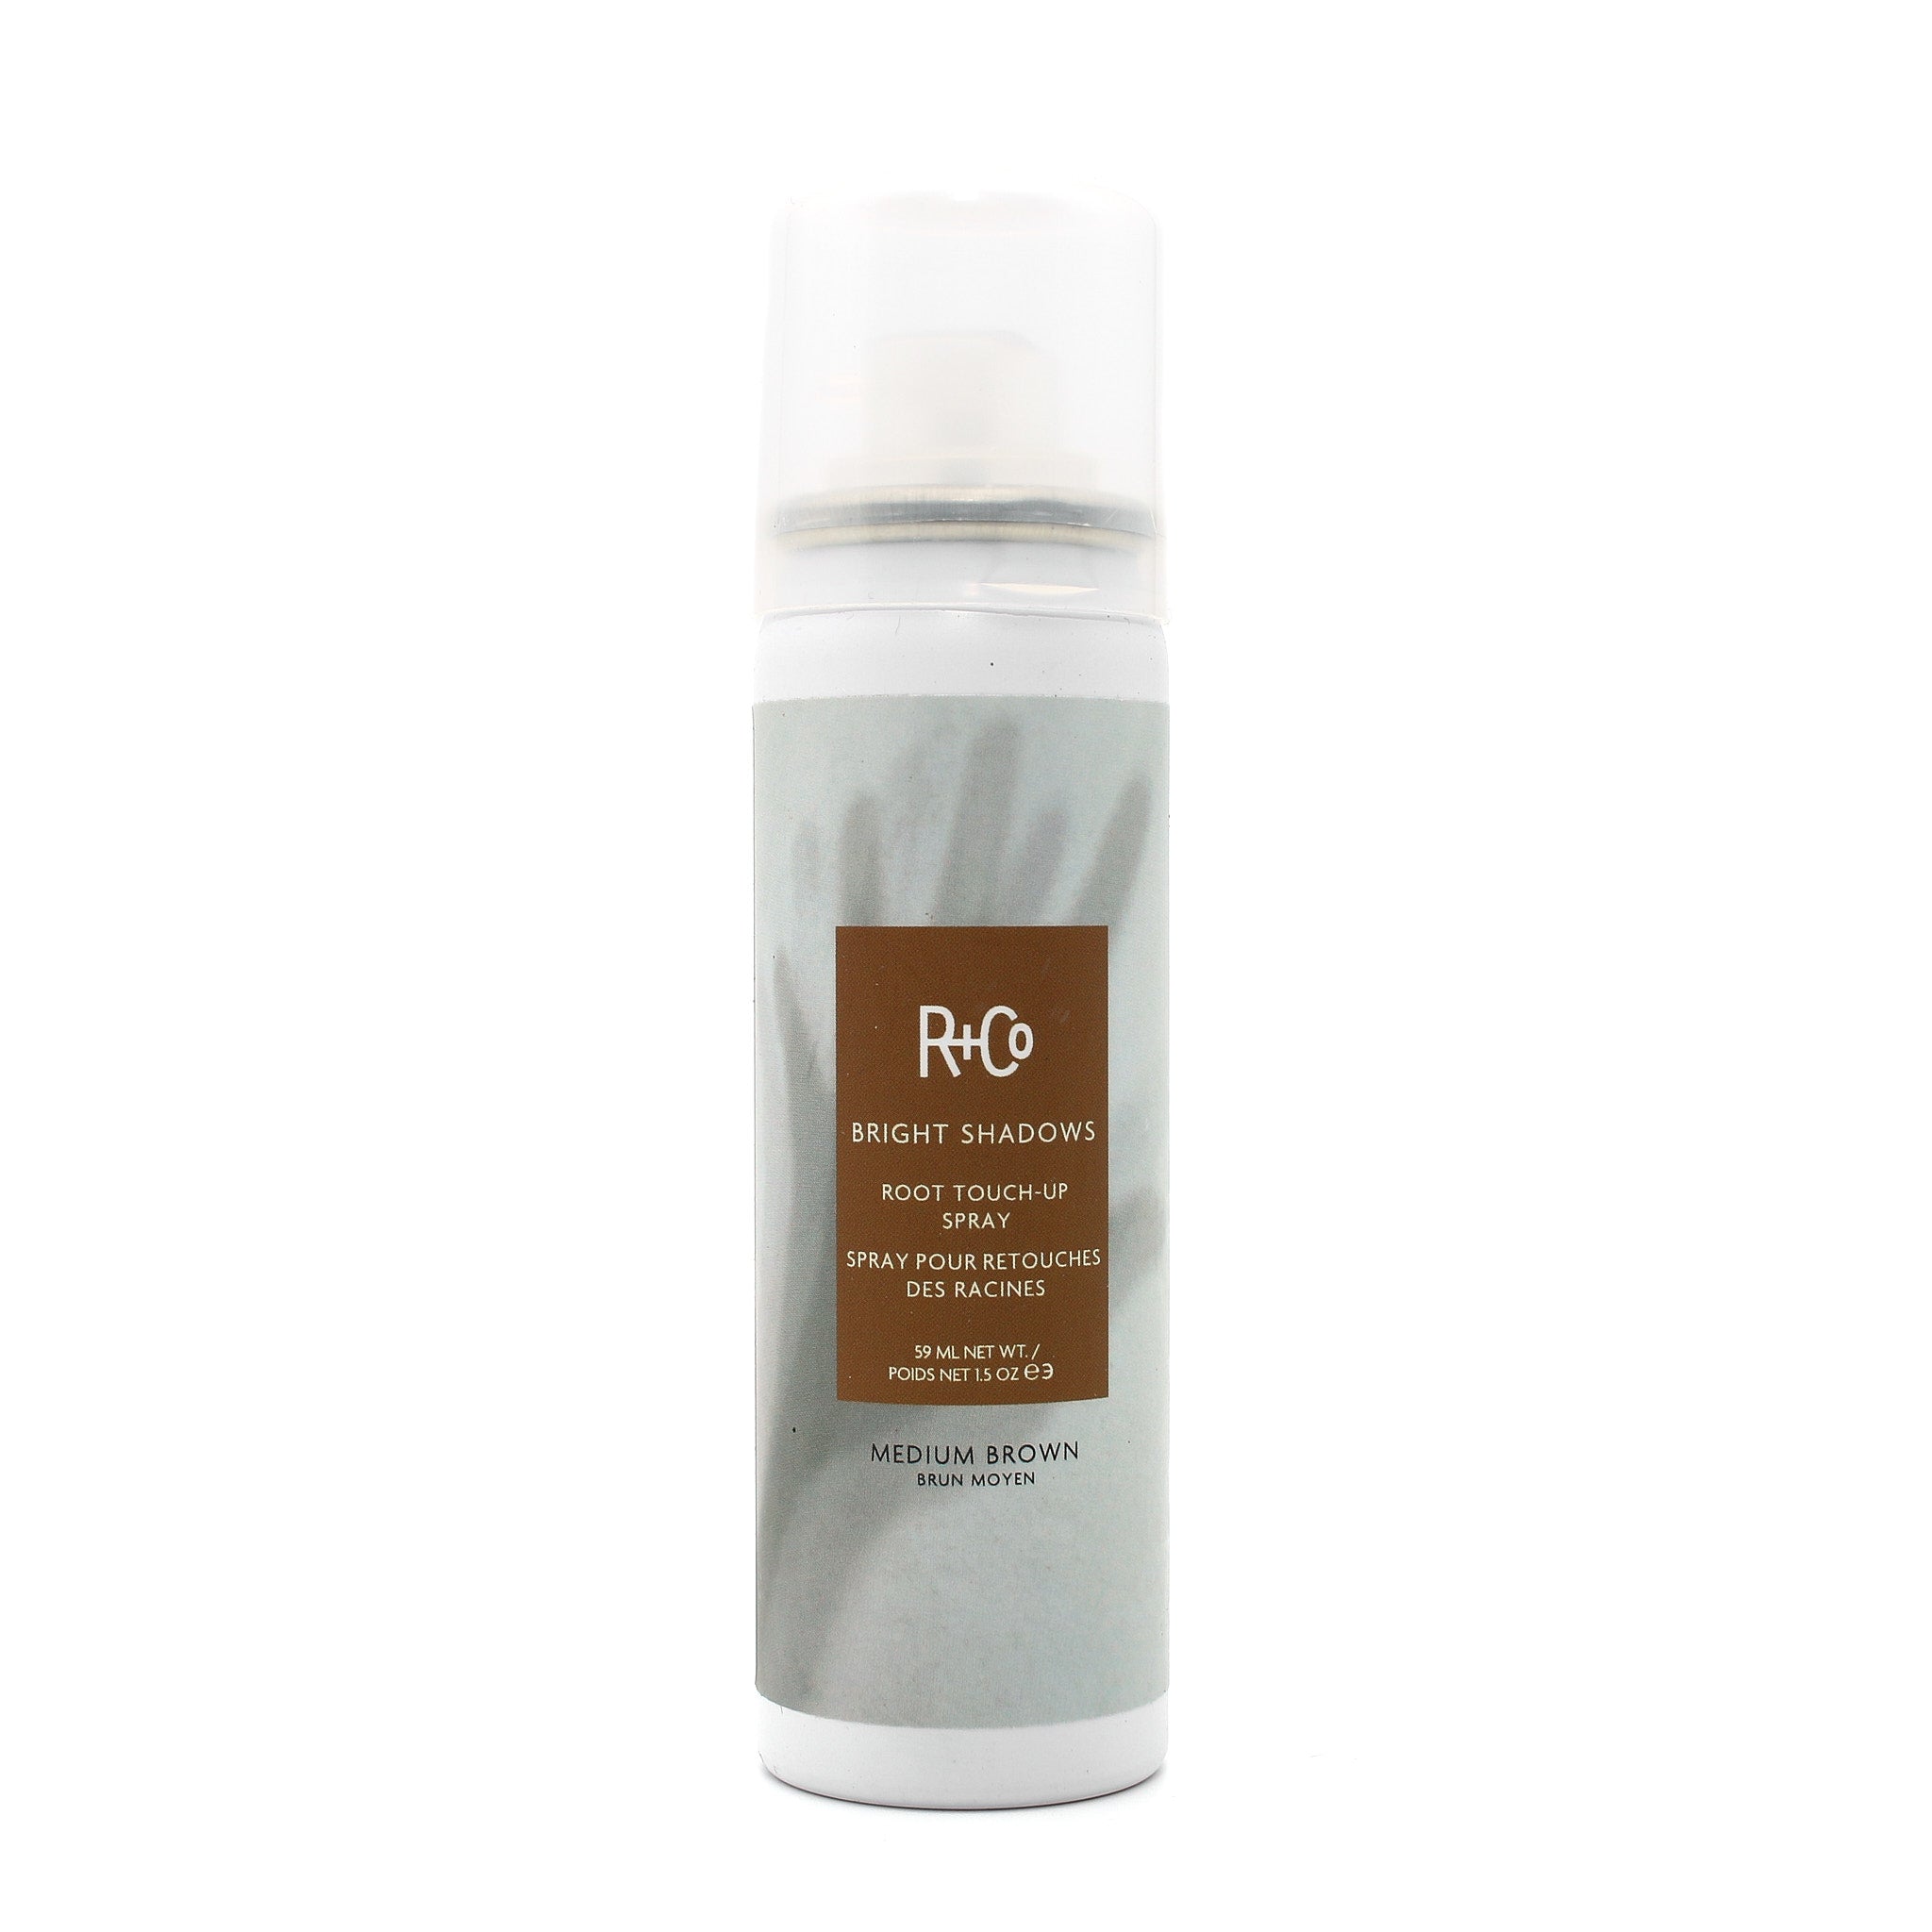 R+CO Bright Shadows Root Touch Up Spray Medium Brown 1.5 oz